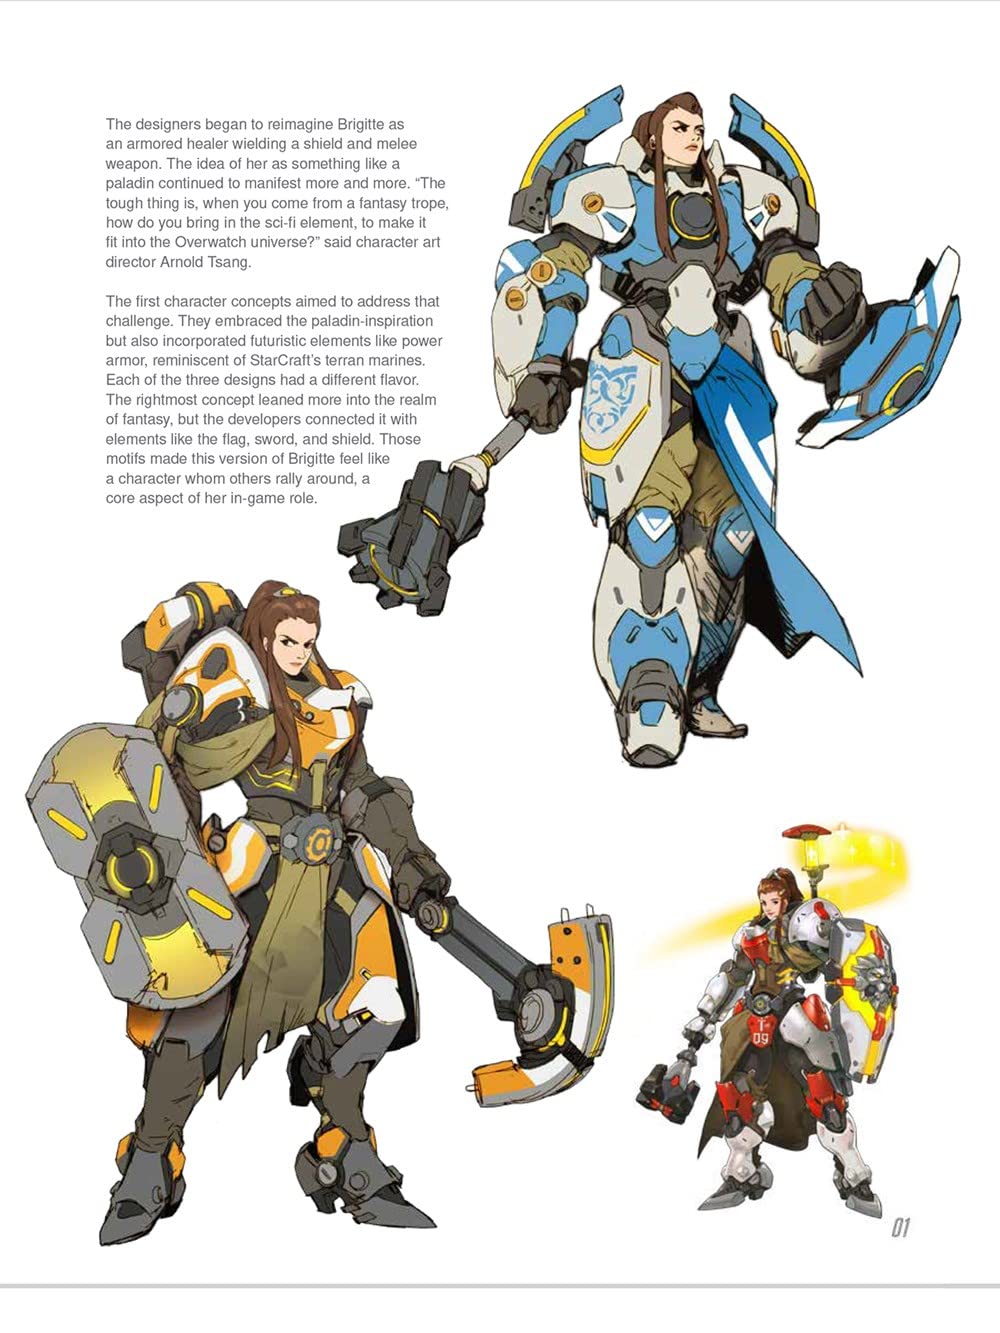 The Art of Overwatch Volume 2 Limited Edition